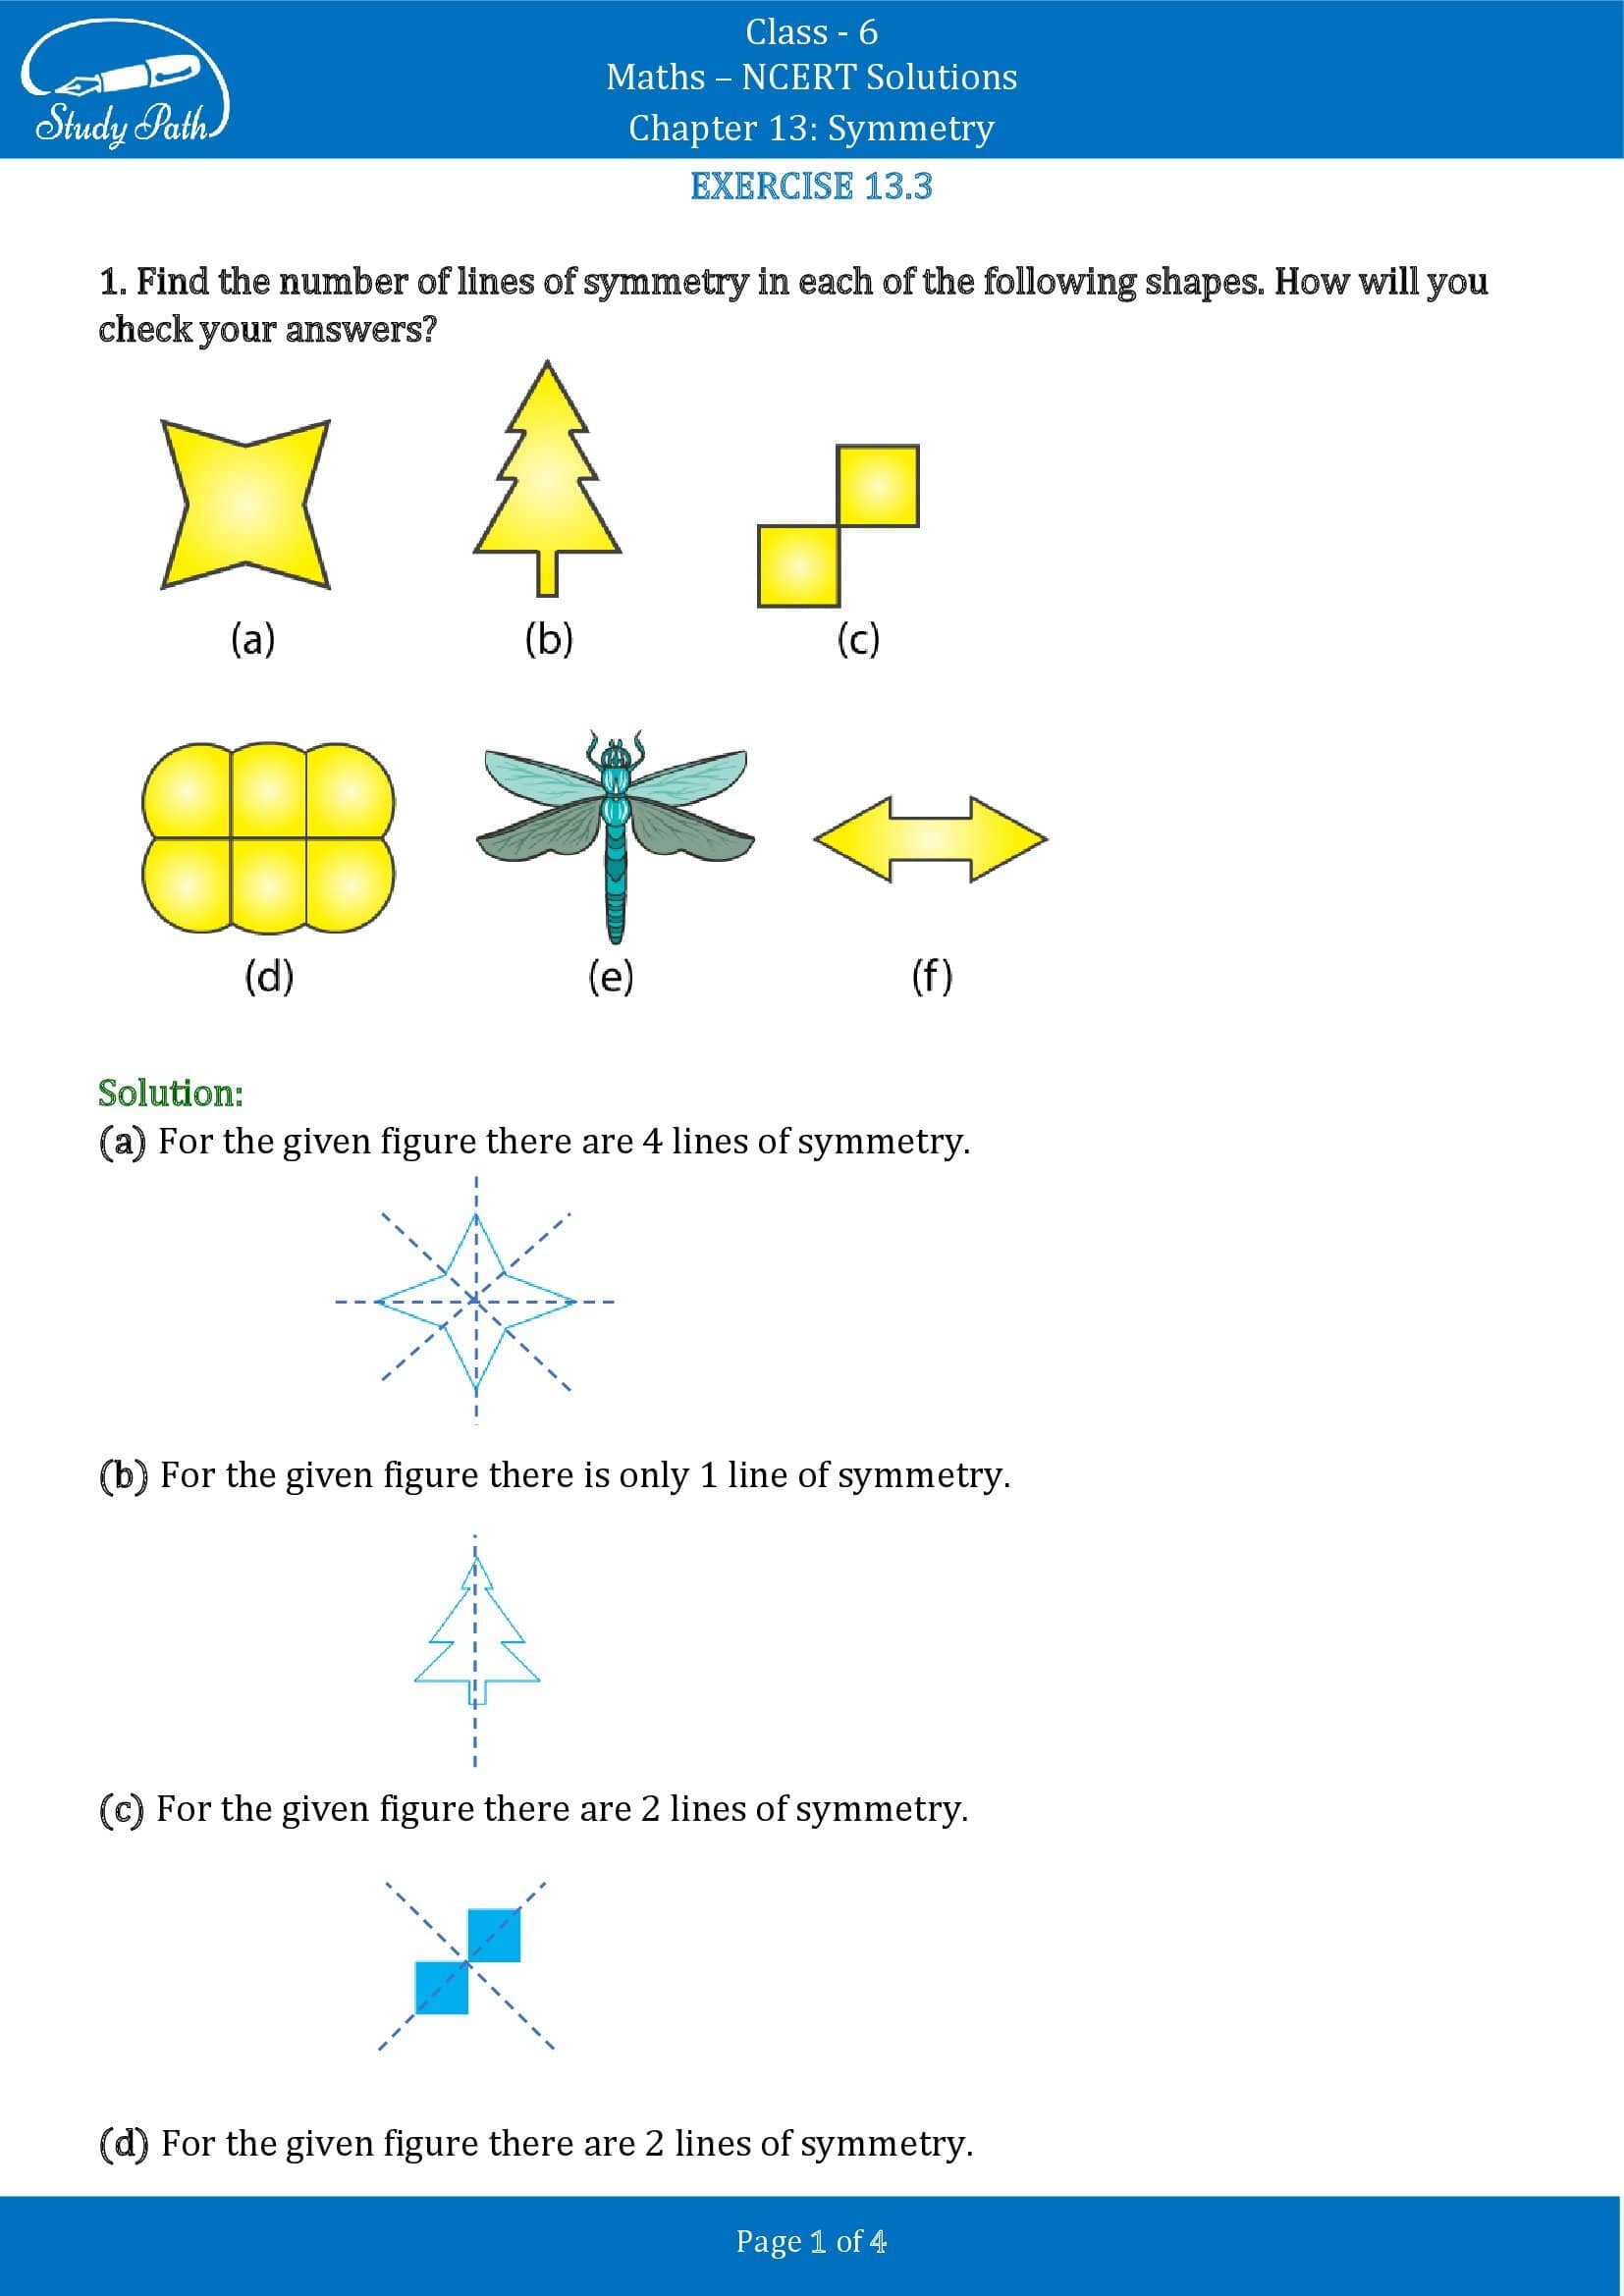 NCERT Solutions for Class 6 Maths Chapter 13 Symmetry Exercise 13.3 00001